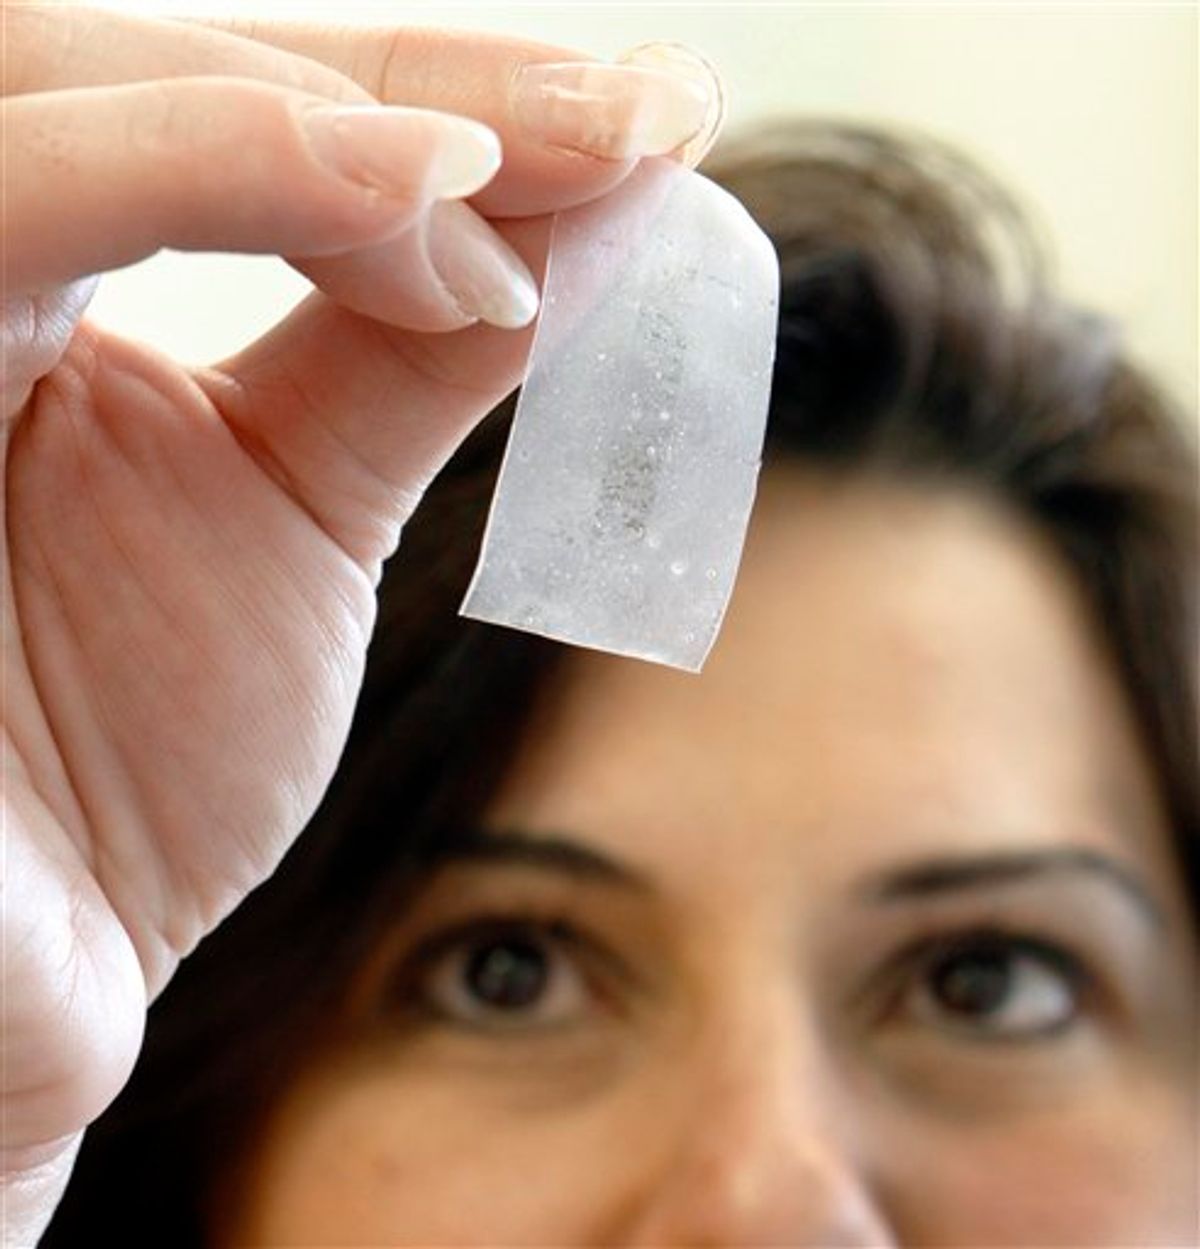 In this photo taken Friday, May 14, 2010, at the MaGee Womens Research Institute in  Pittsburgh, lead researcher Lisa Rohan shows a vaginal film formulated with drugs to target against HIV infection.  (AP Photo/Keith Srakocic) (AP)